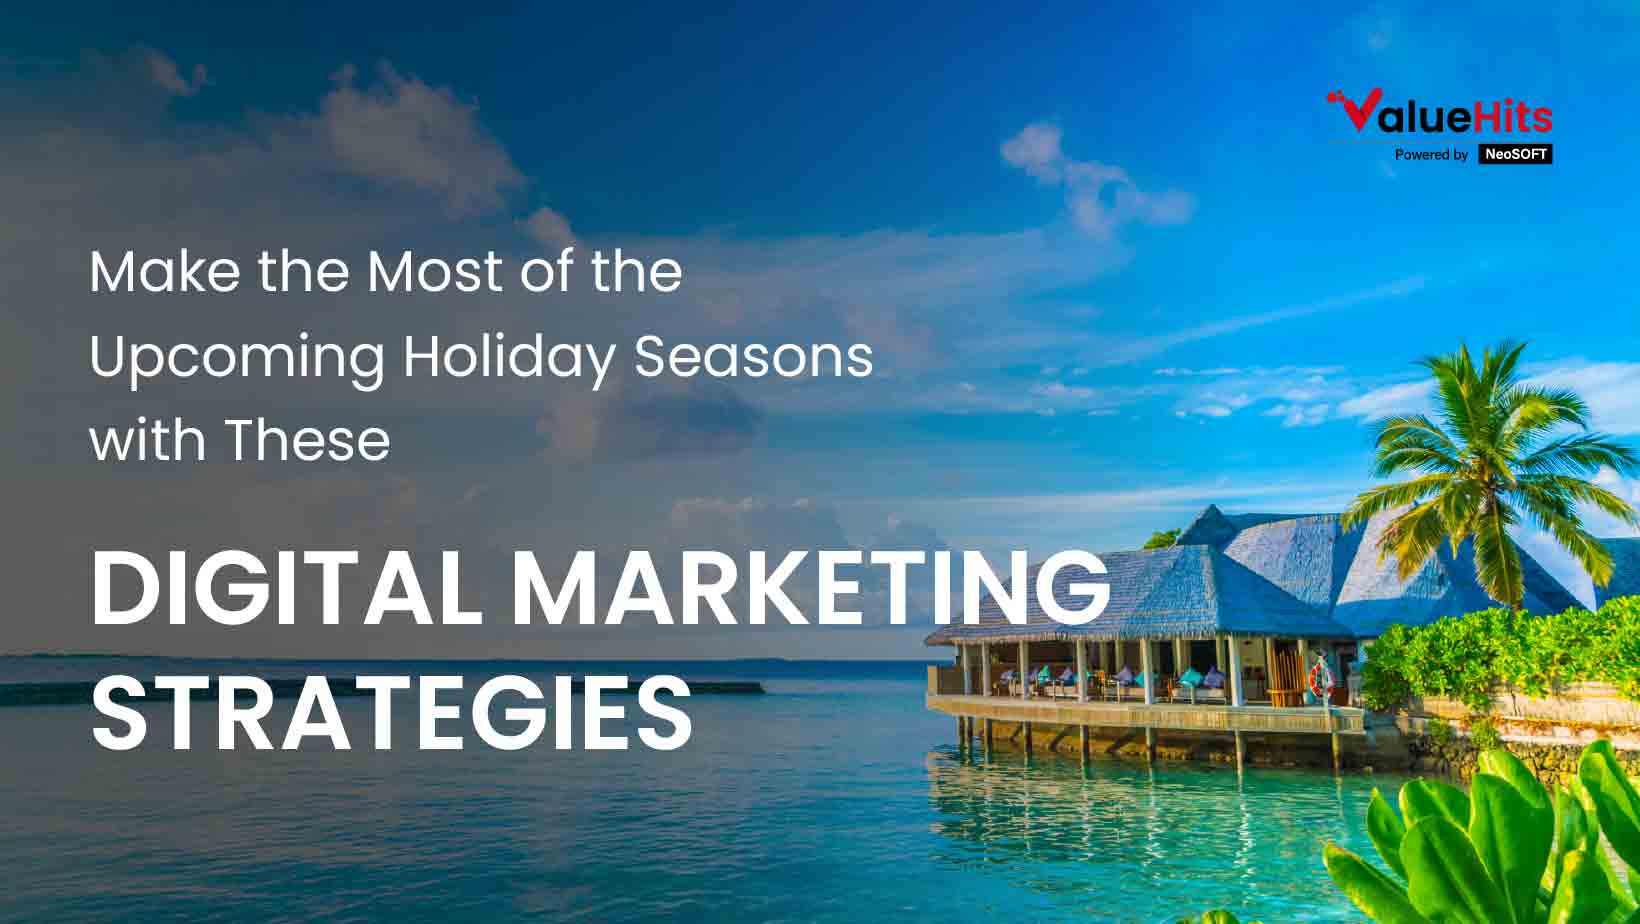 Make the Most of the Upcoming Holiday Seasons with These Digital Marketing Strategies